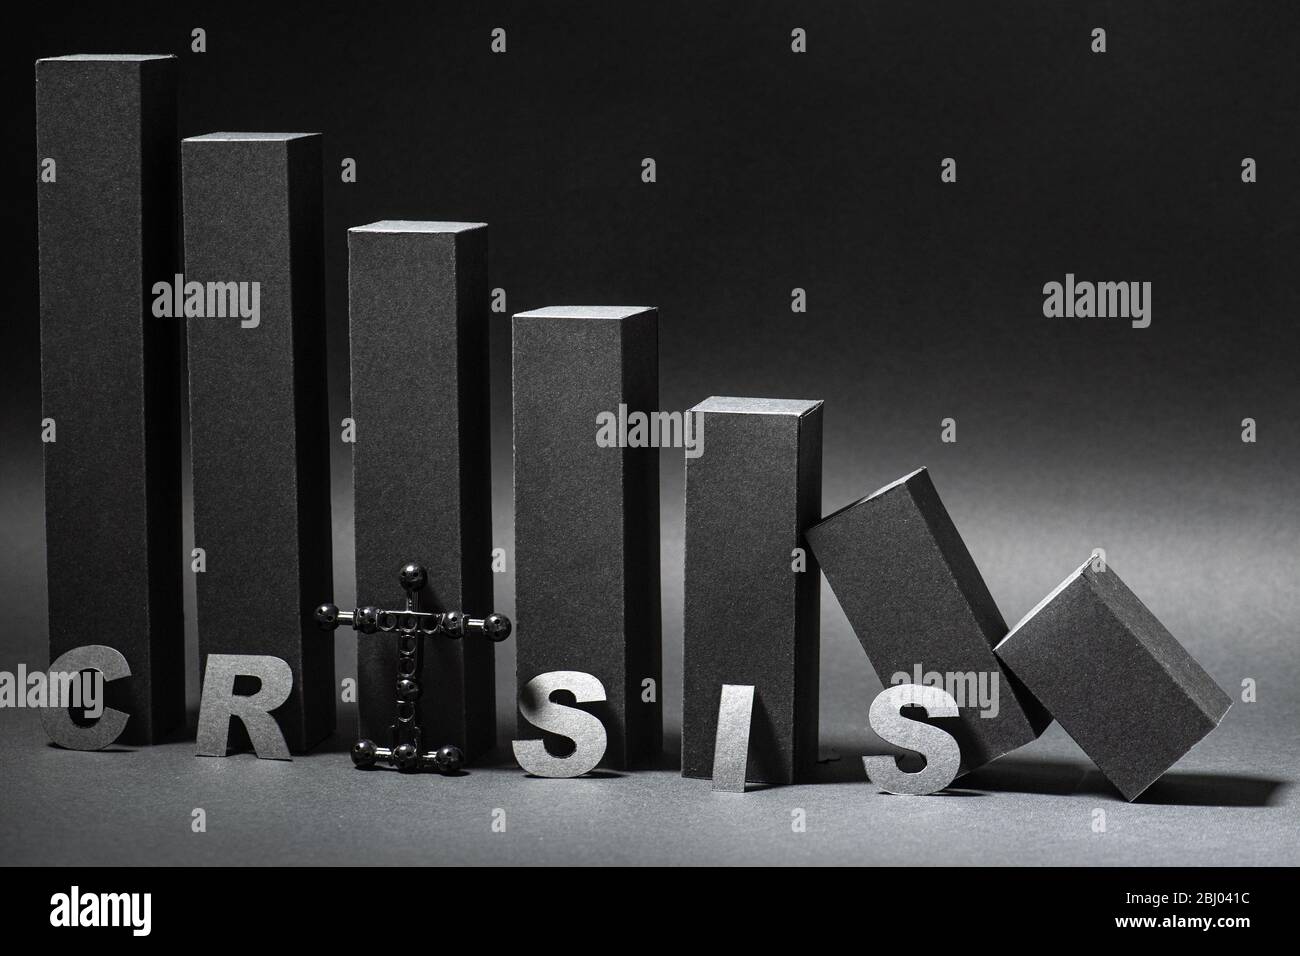 Histogram and crisis word with I letter changed by a lego piece. Stock Photo